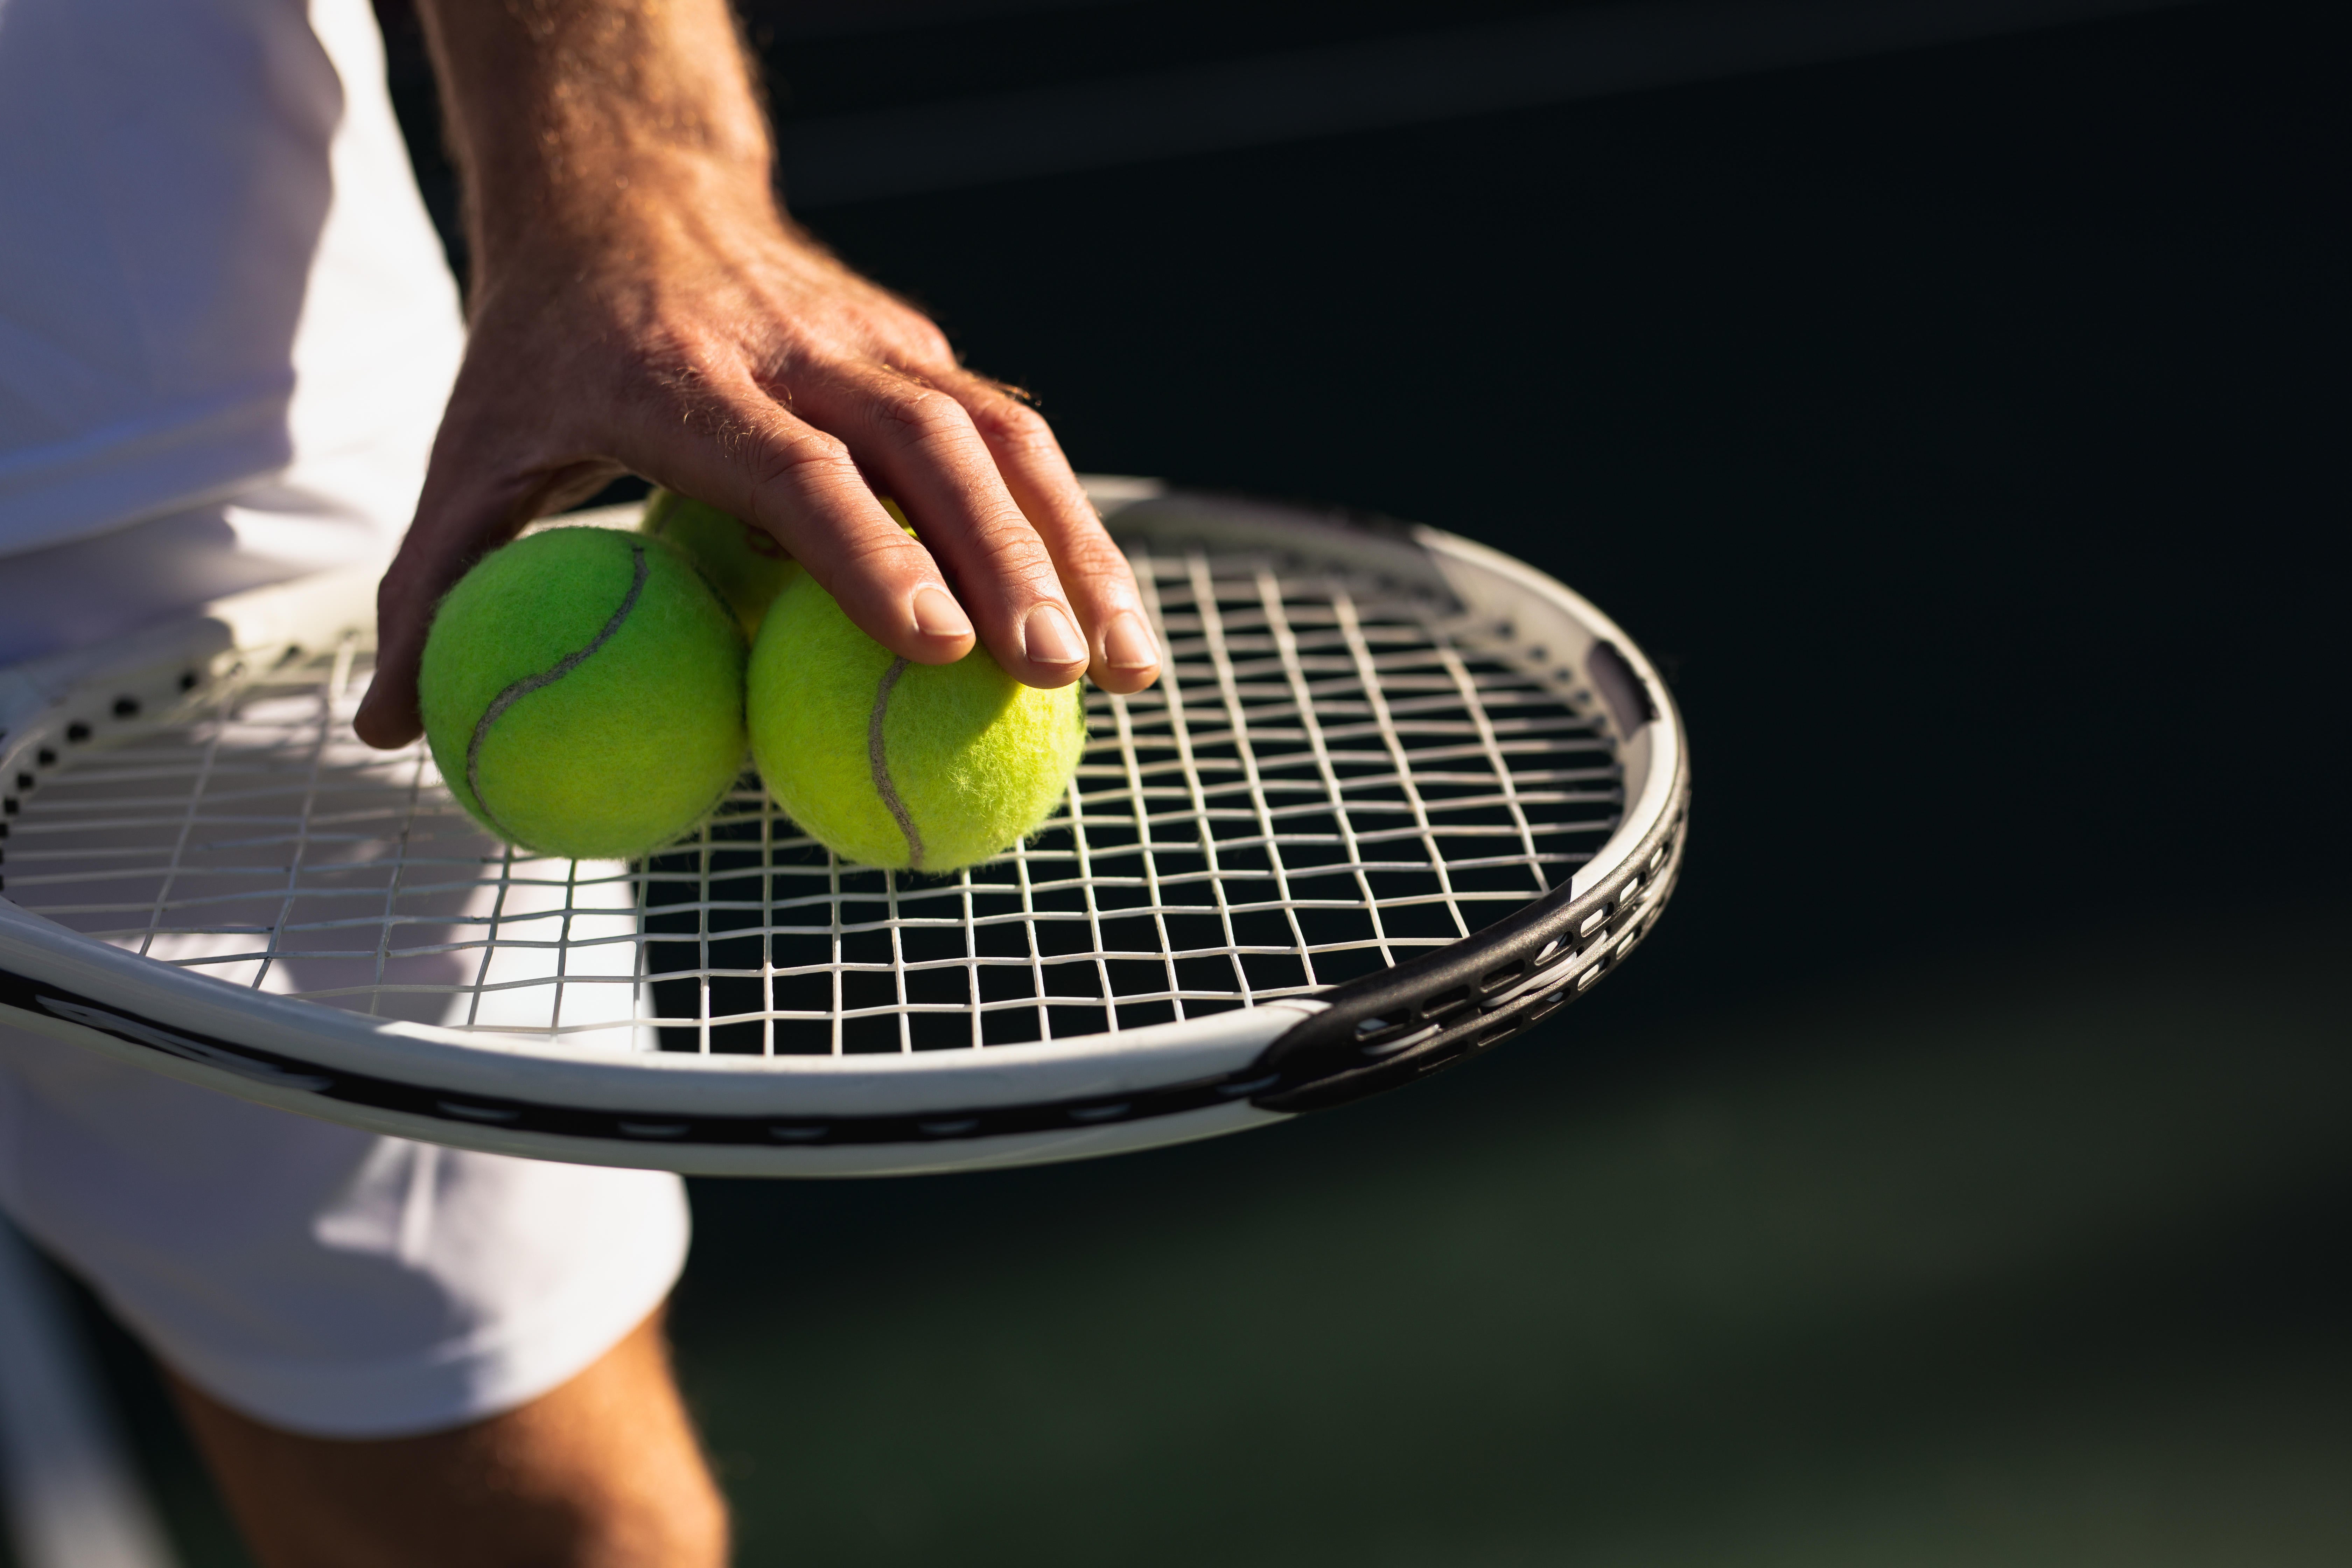 pa ready, wimbledon, andy murray, lawn tennis association, reading, how to, as wimbledon begins – how to perfect your tennis technique this summer